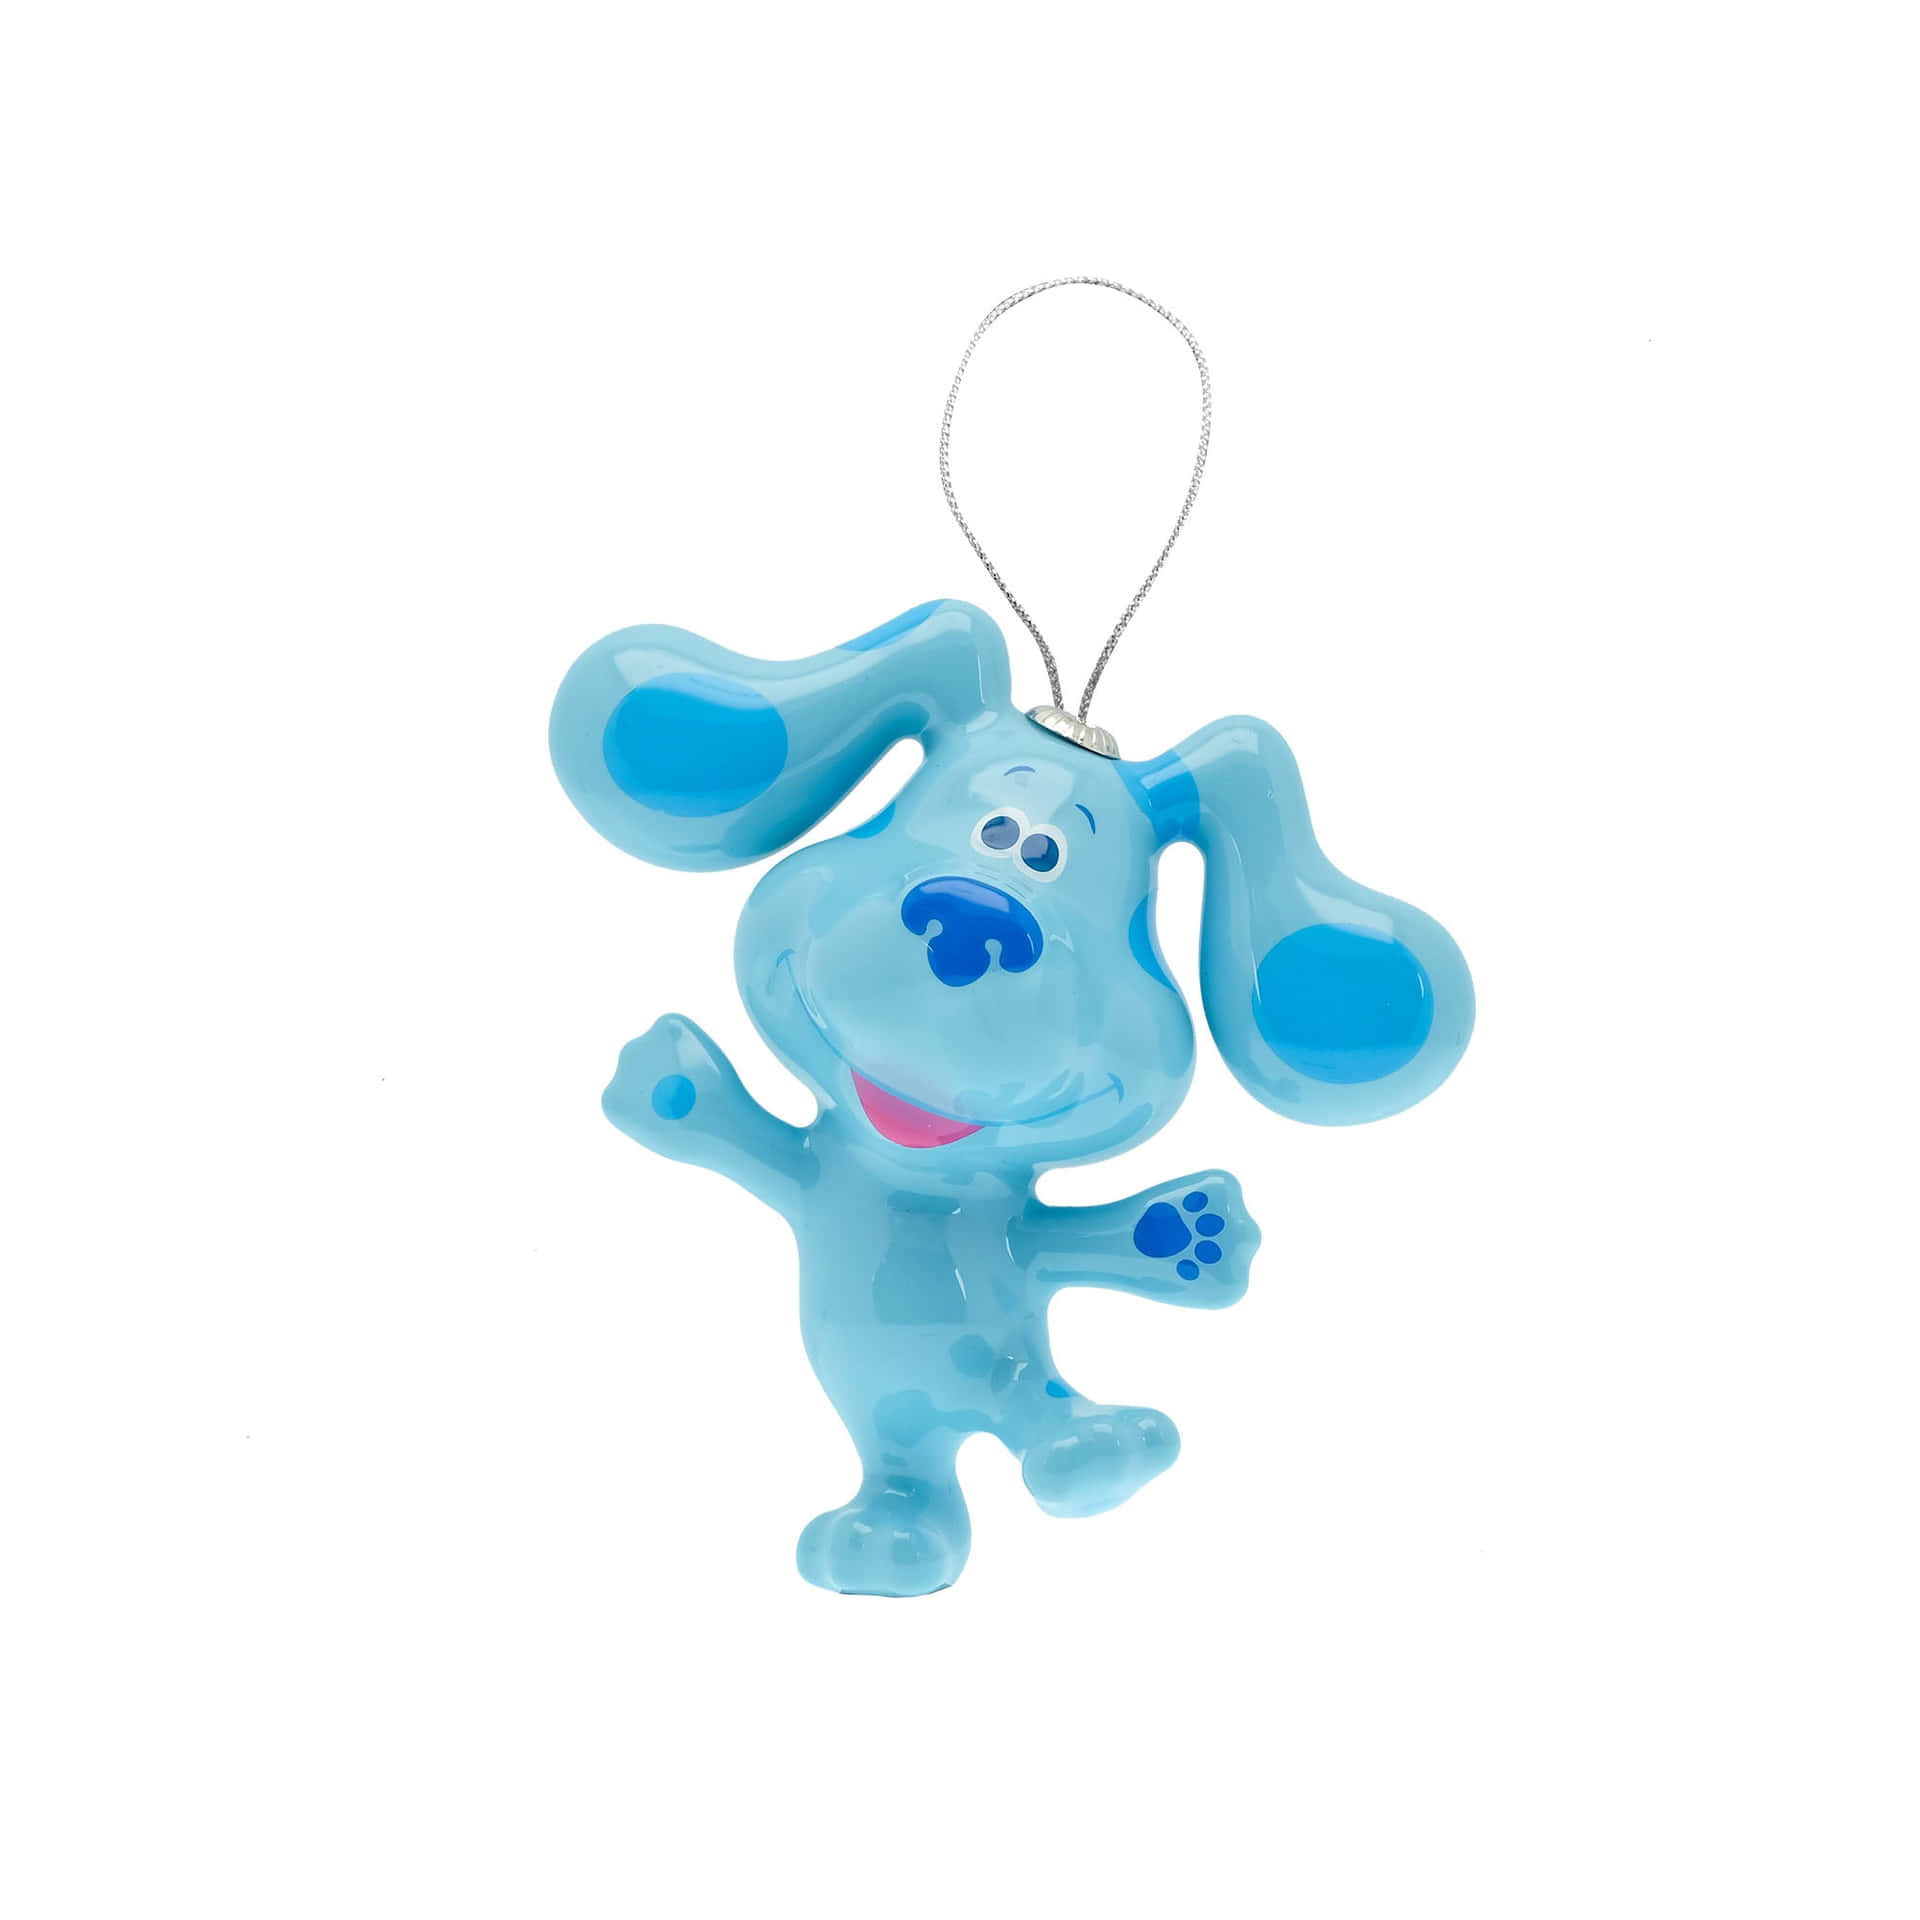 Blue Dog Ornament Hanging On A White Background